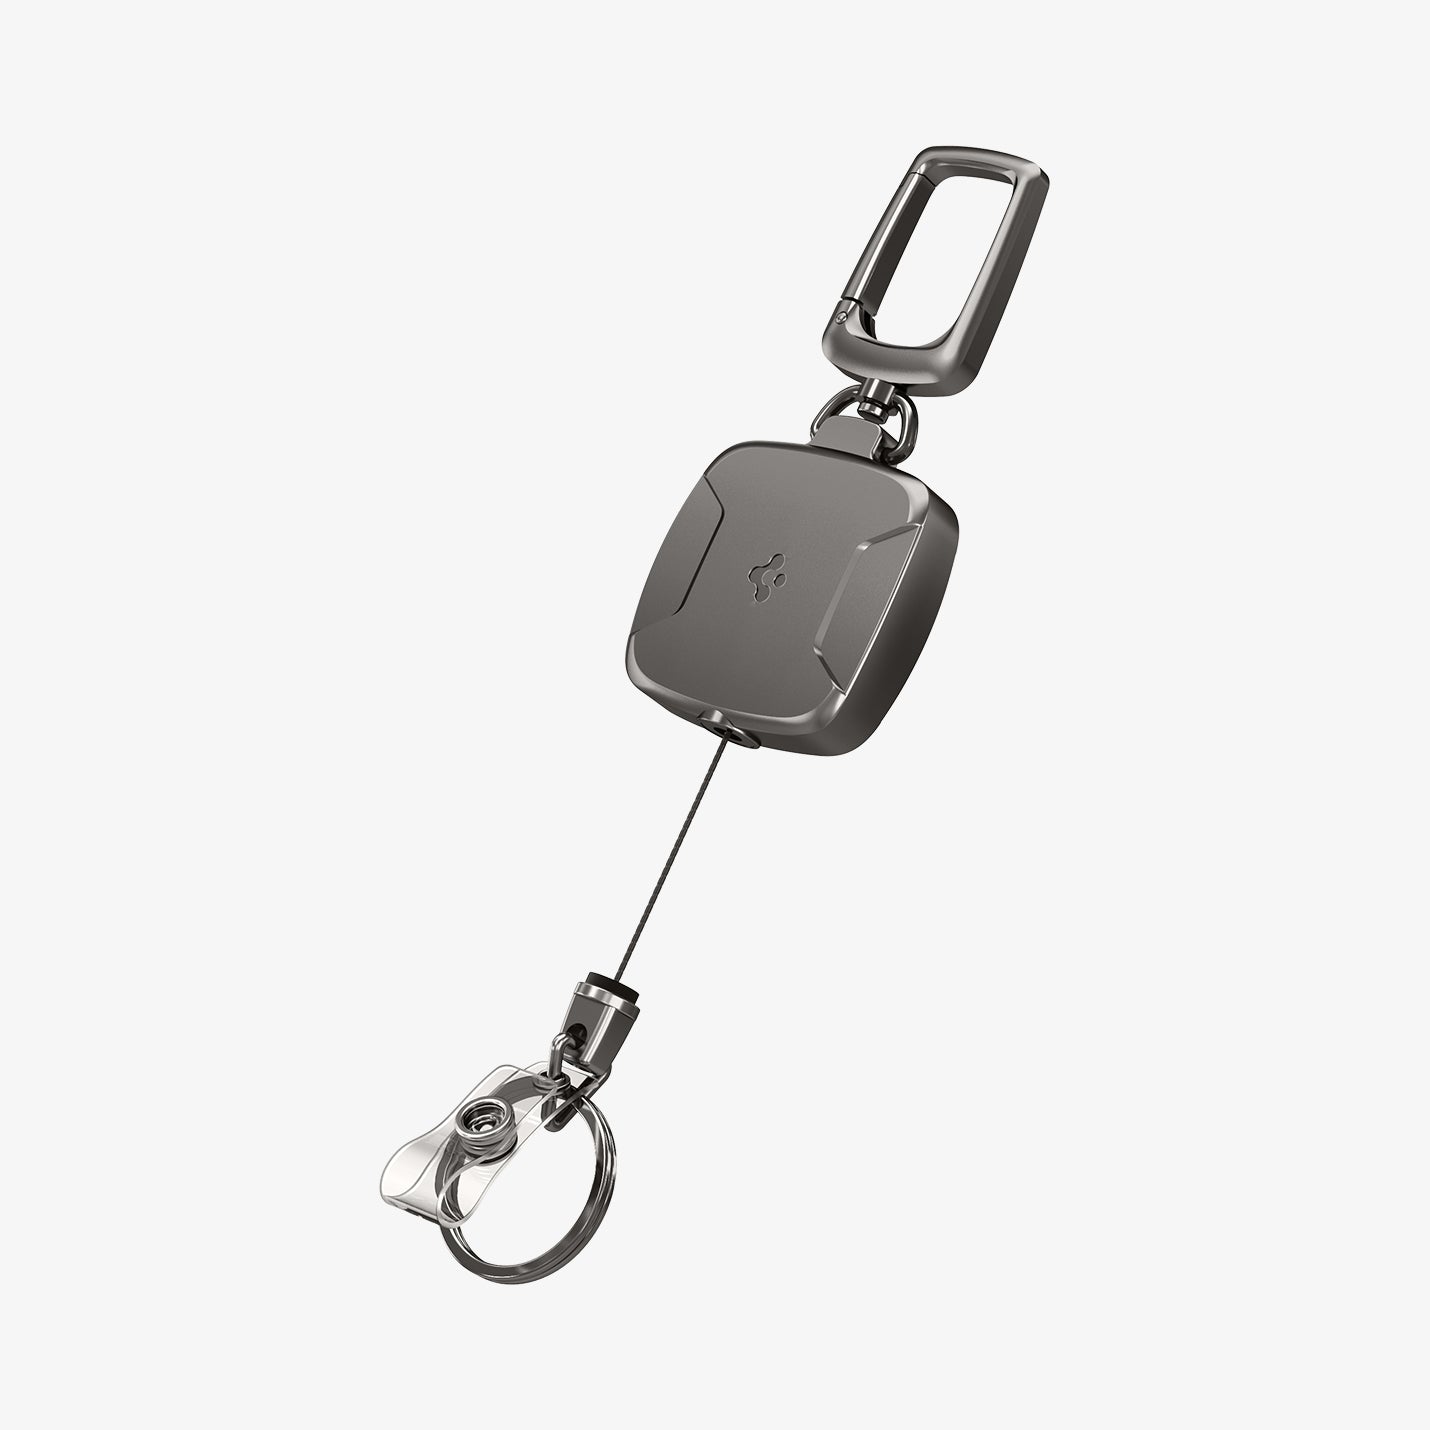 AHP03019 - Carabiner Reel Clip in black showing the front and side with clip extended out slightly